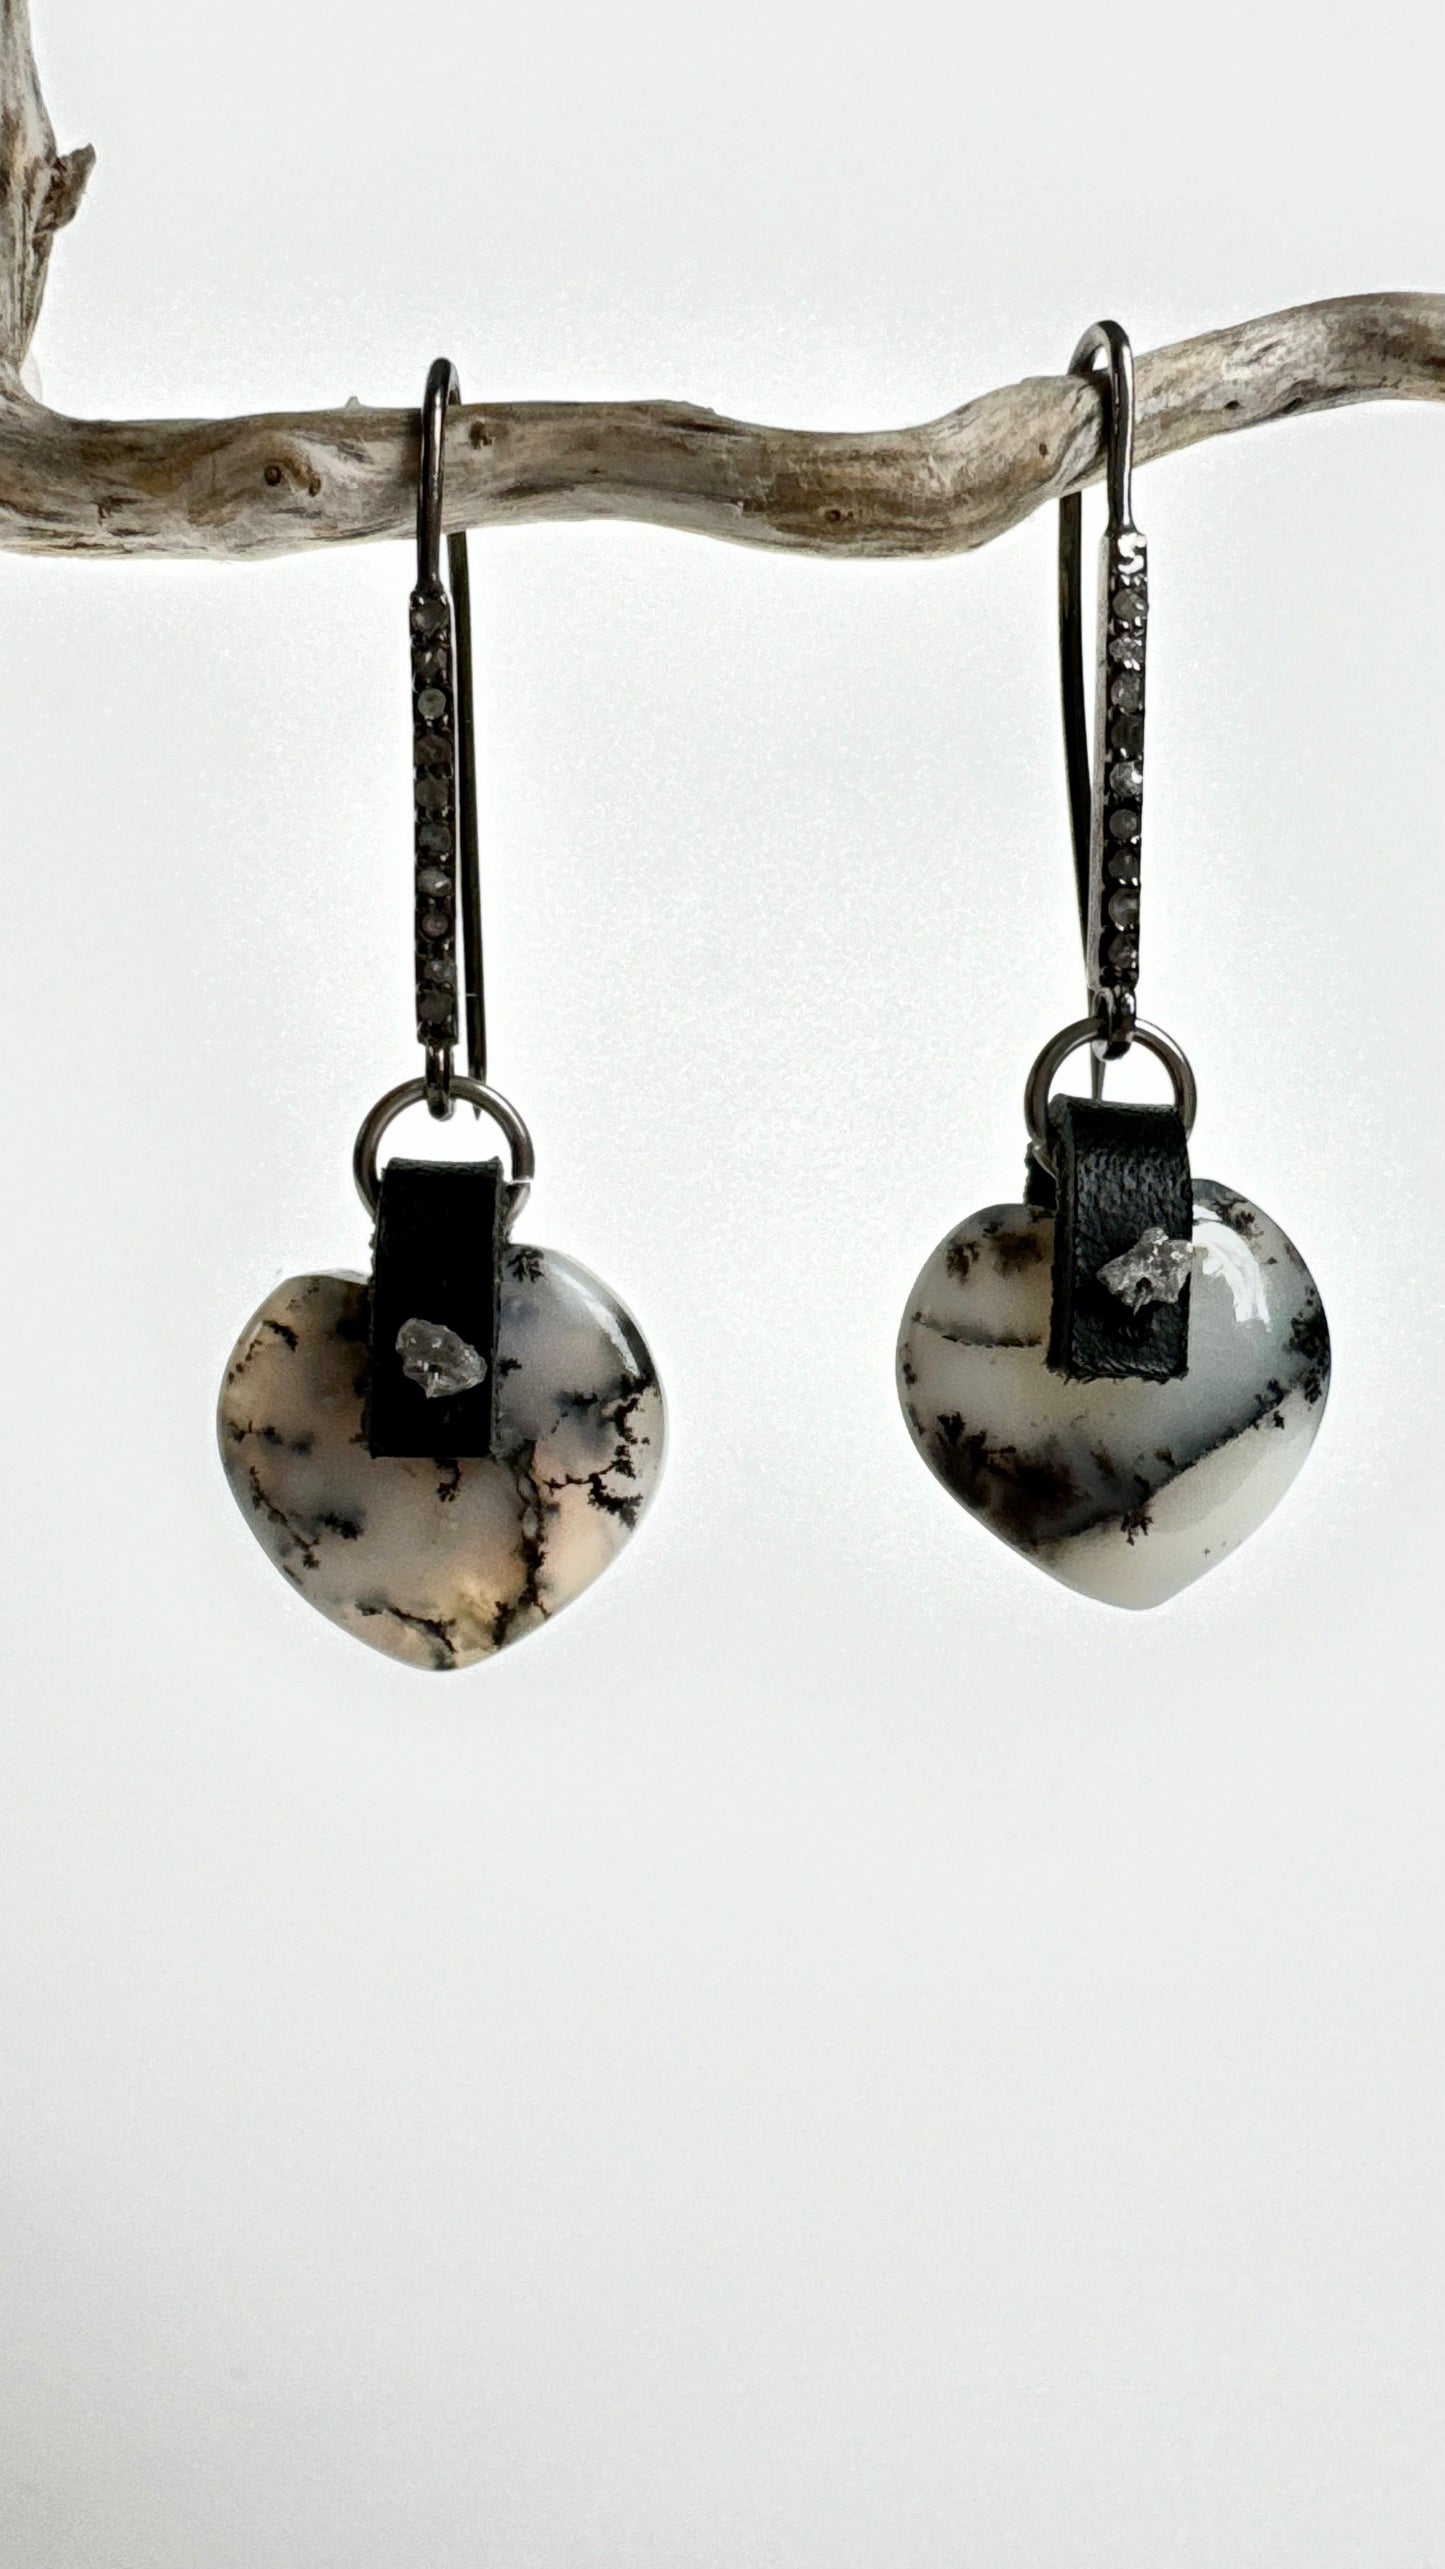 Dendritic Opal Puffed Heart Earrings with pave diamonds set oxidized sterling silver OOAK (one of a kind)